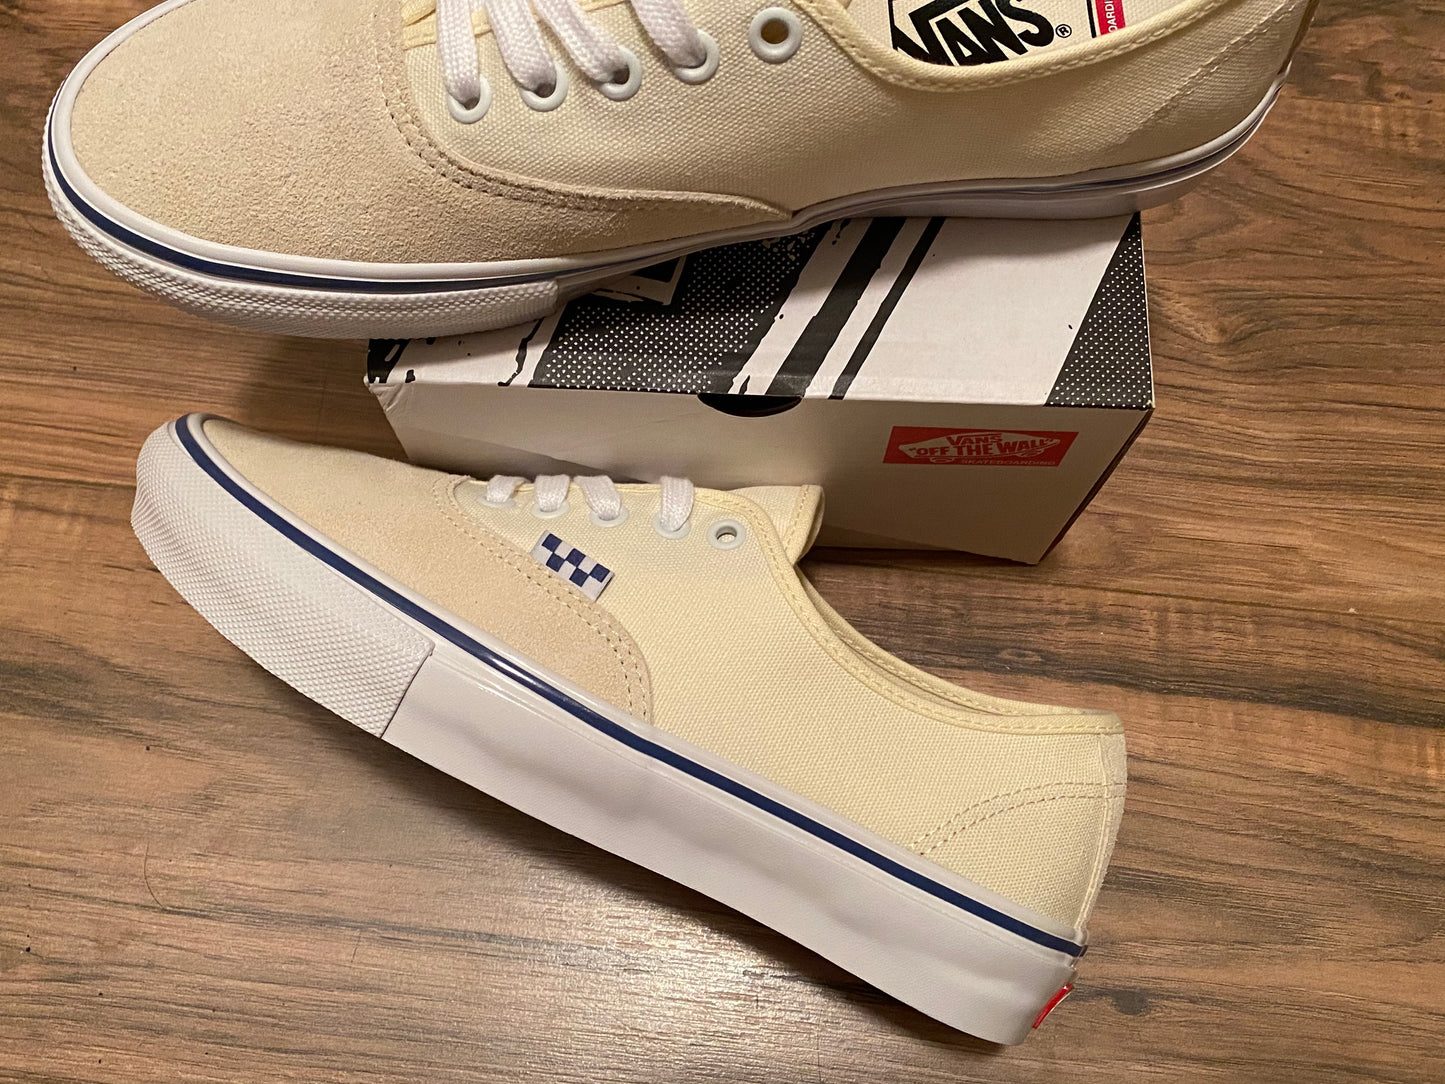 Skate Authentic Shoe Off Wht (size options listed)